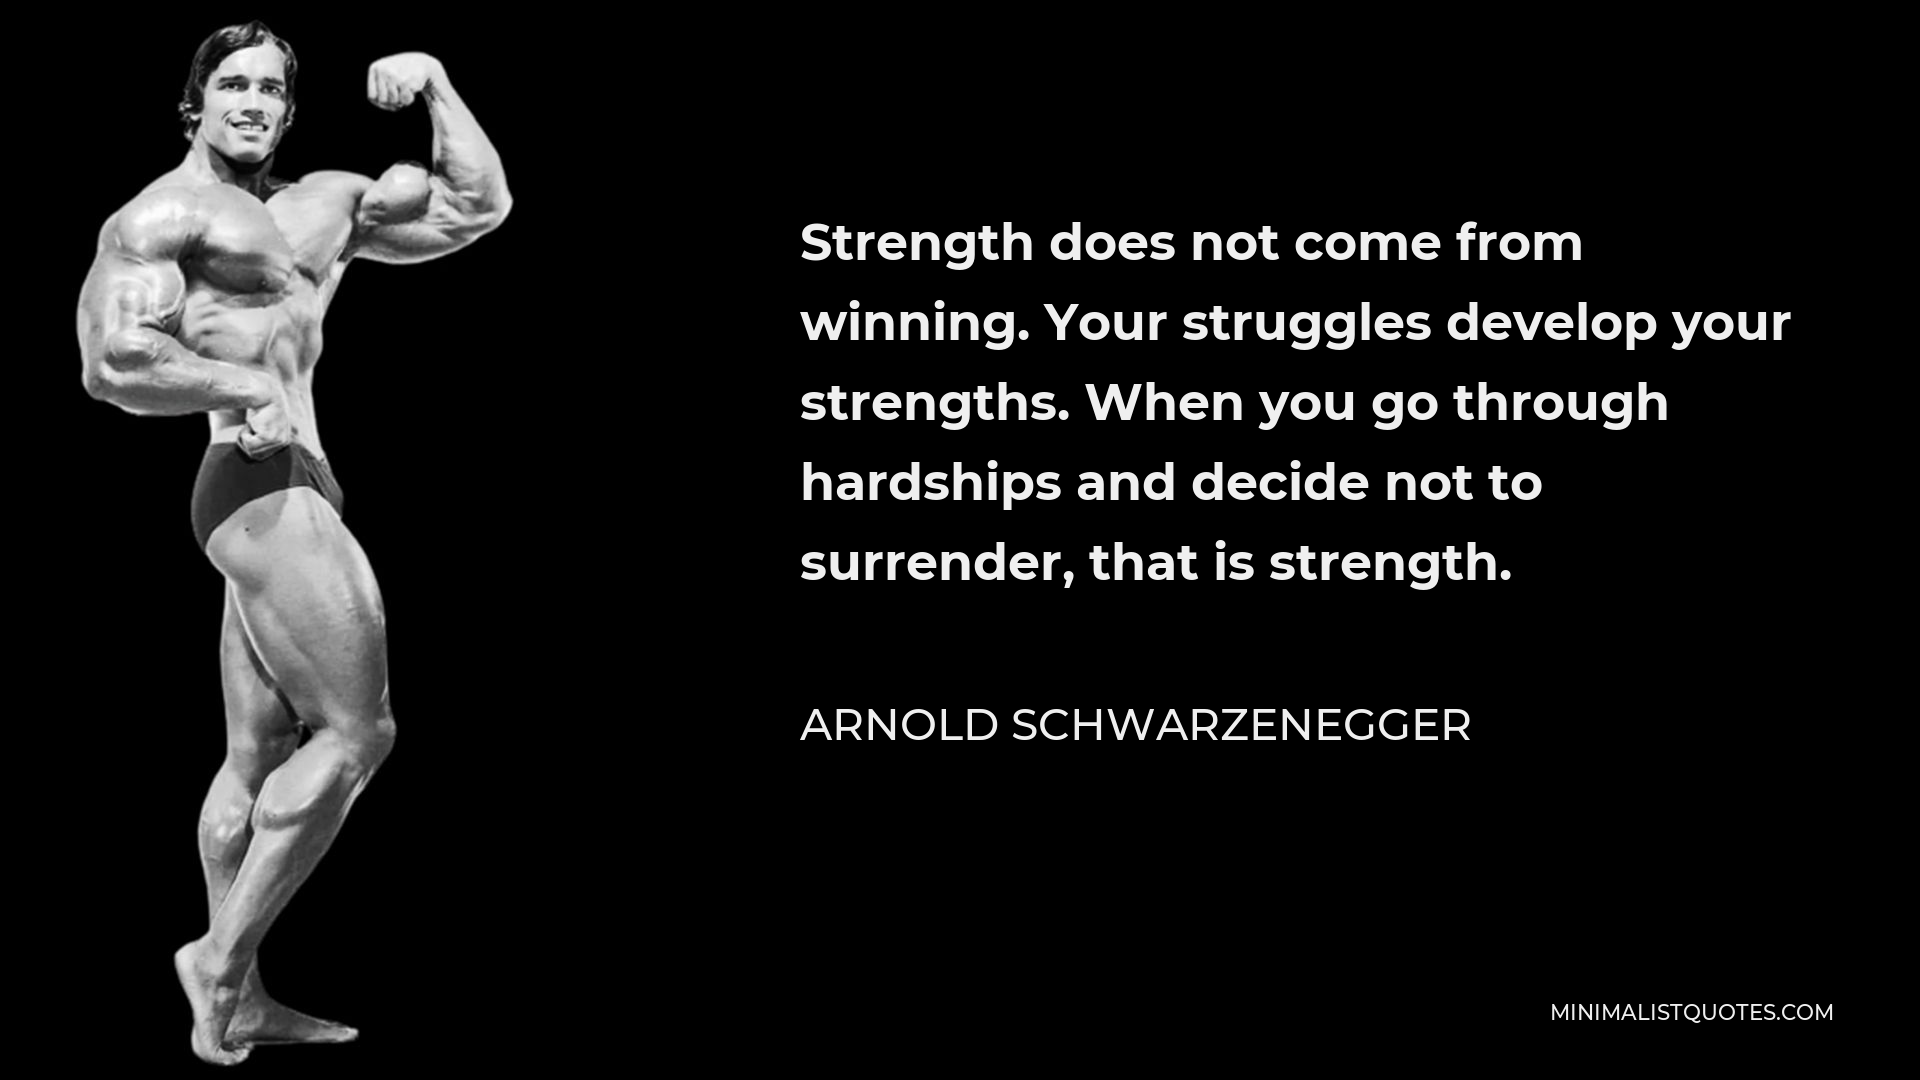 Arnold Schwarzenegger Quote - Strength does not come from winning. Your struggles develop your strengths. When you go through hardships and decide not to surrender, that is strength.